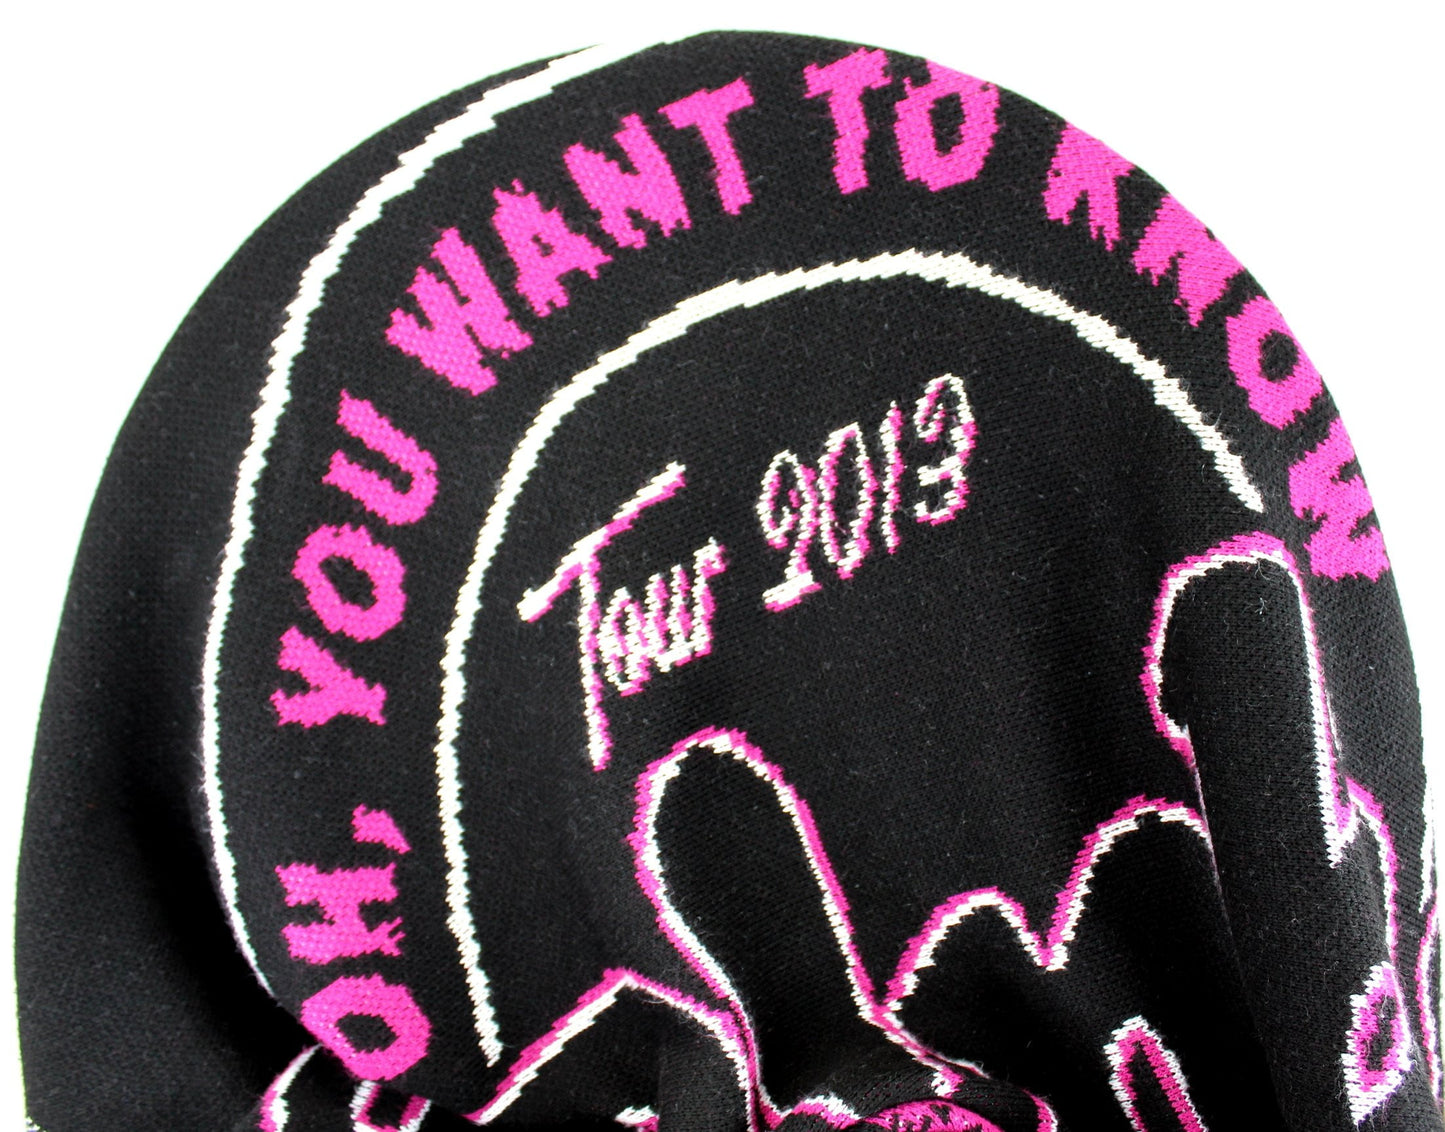 USA Acrylic Throw - "Pink" 2013 Tour ~ Black Sweater Knit - 49" X 64" You want to know